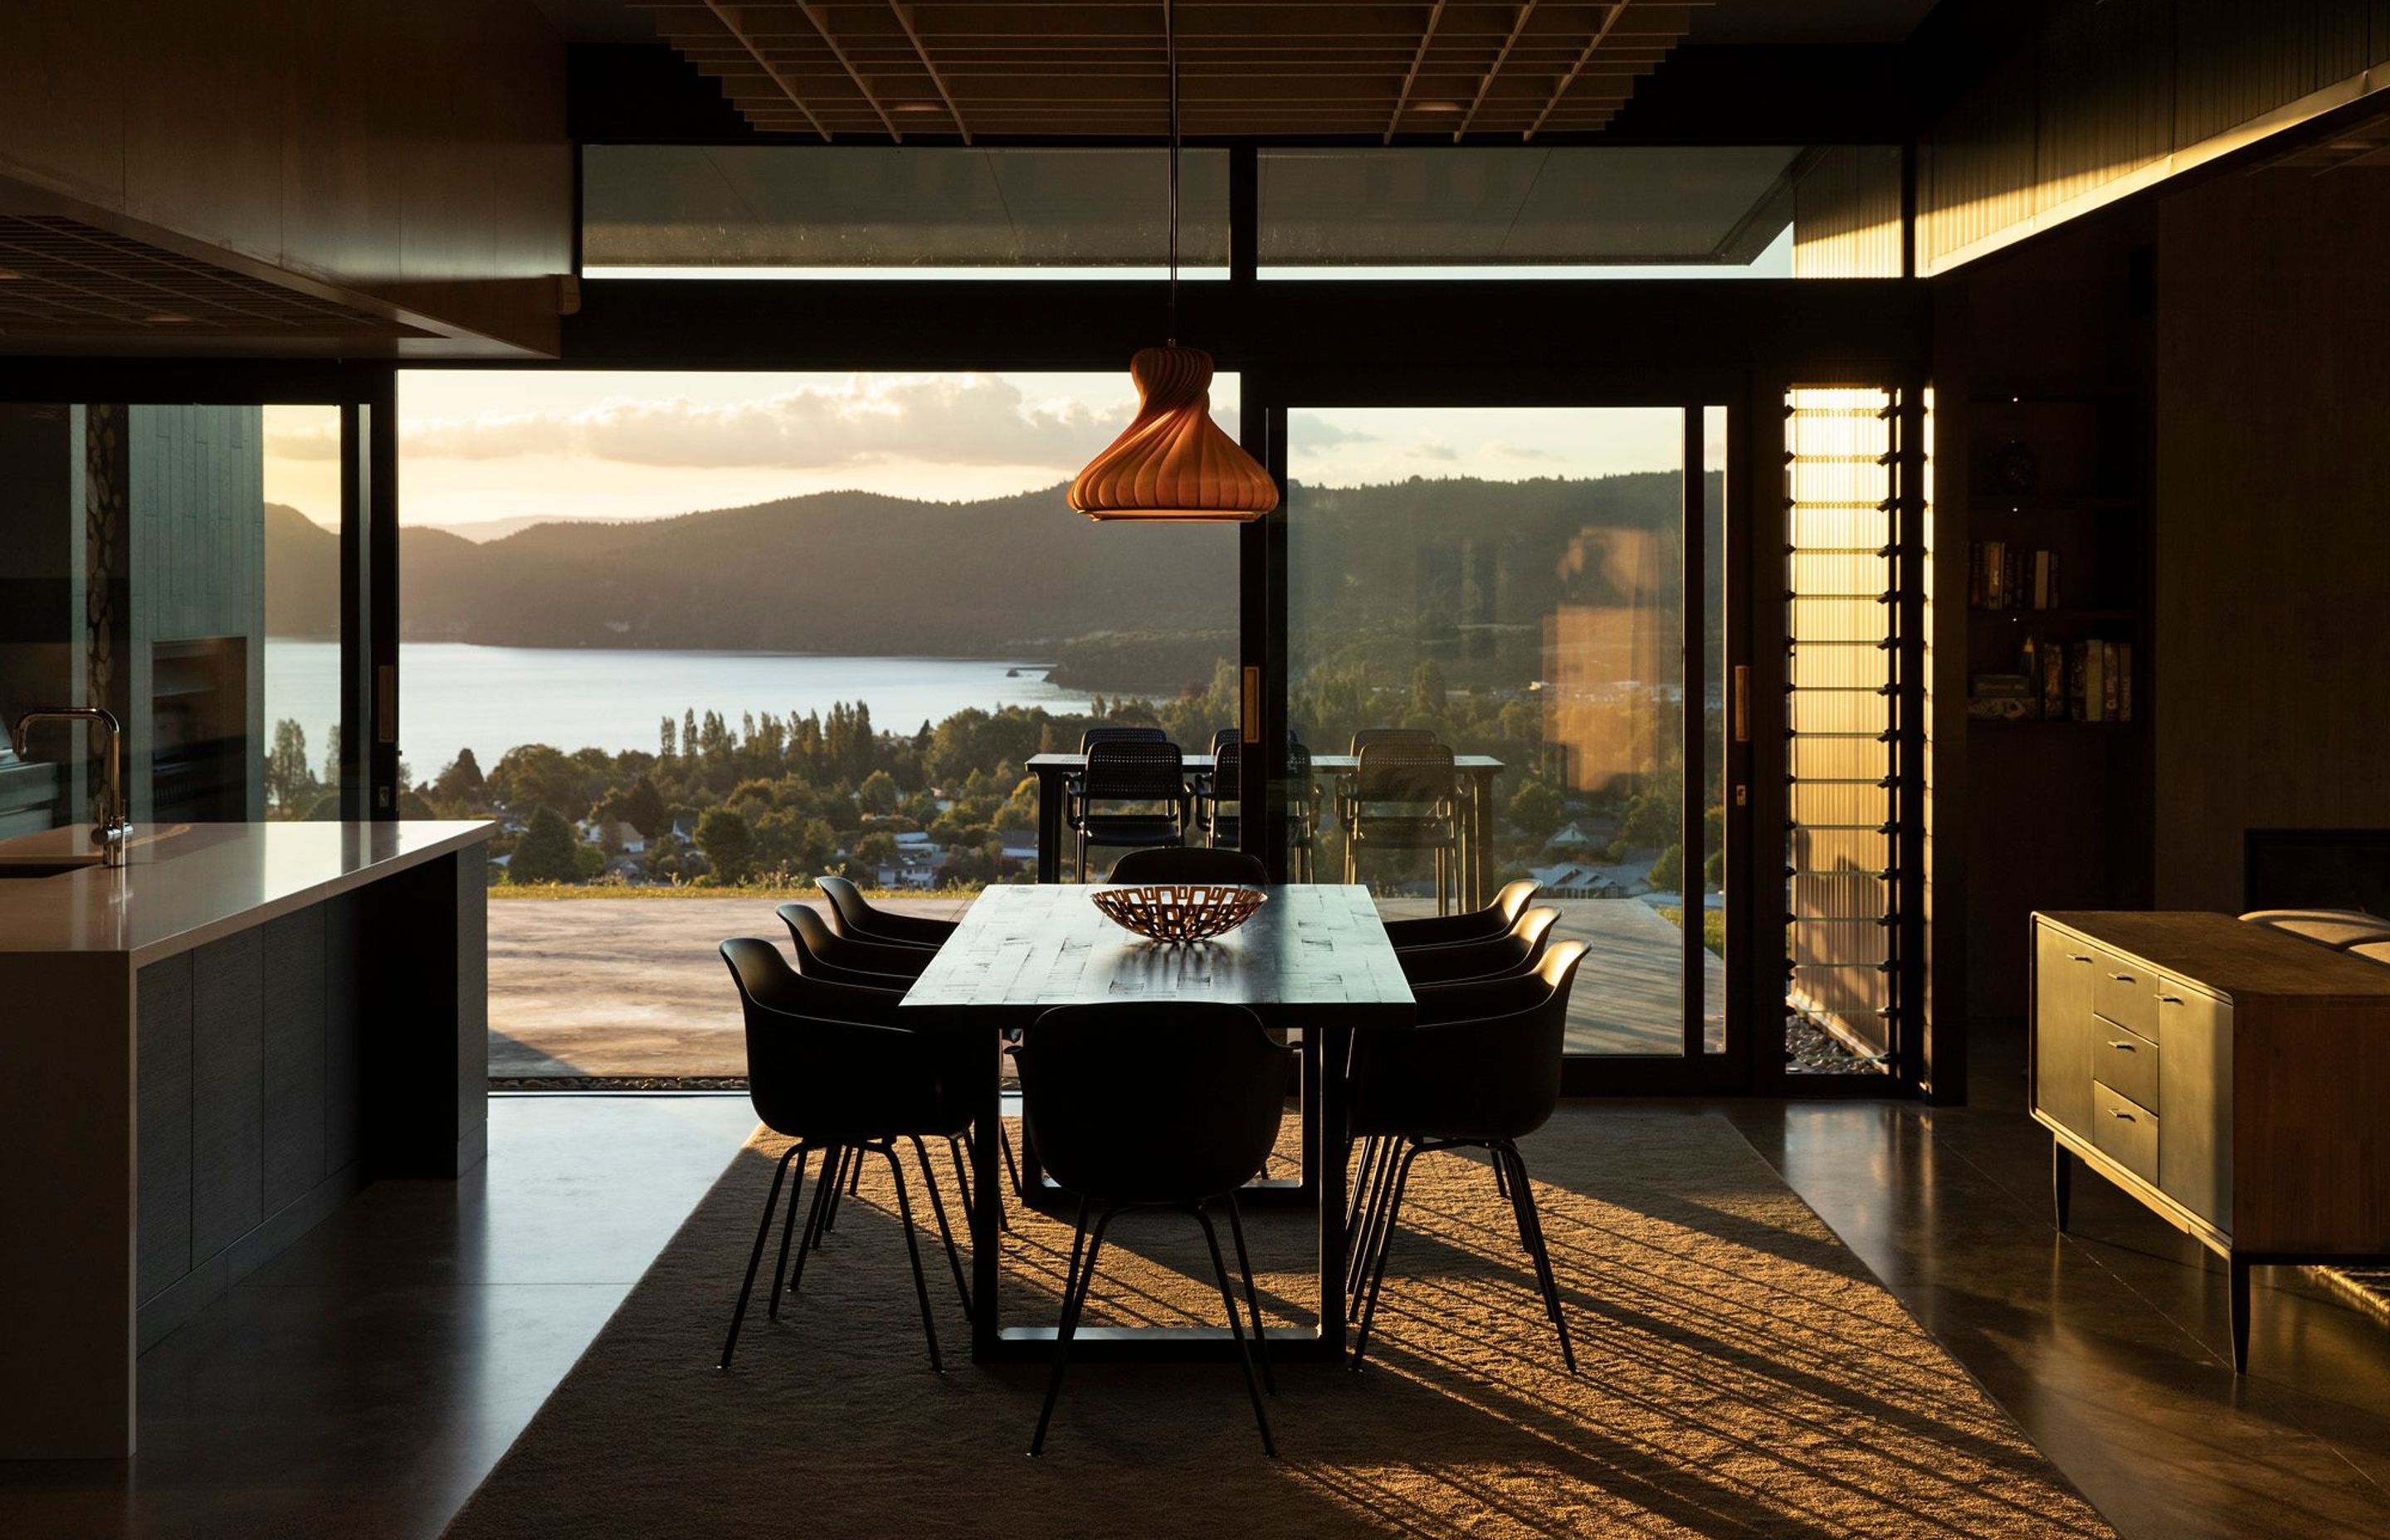 The dining area at dusk is possibly the most delicious time of day to watch the incredible sunsets over Lake Taupo. Photograph: Simon Devitt.